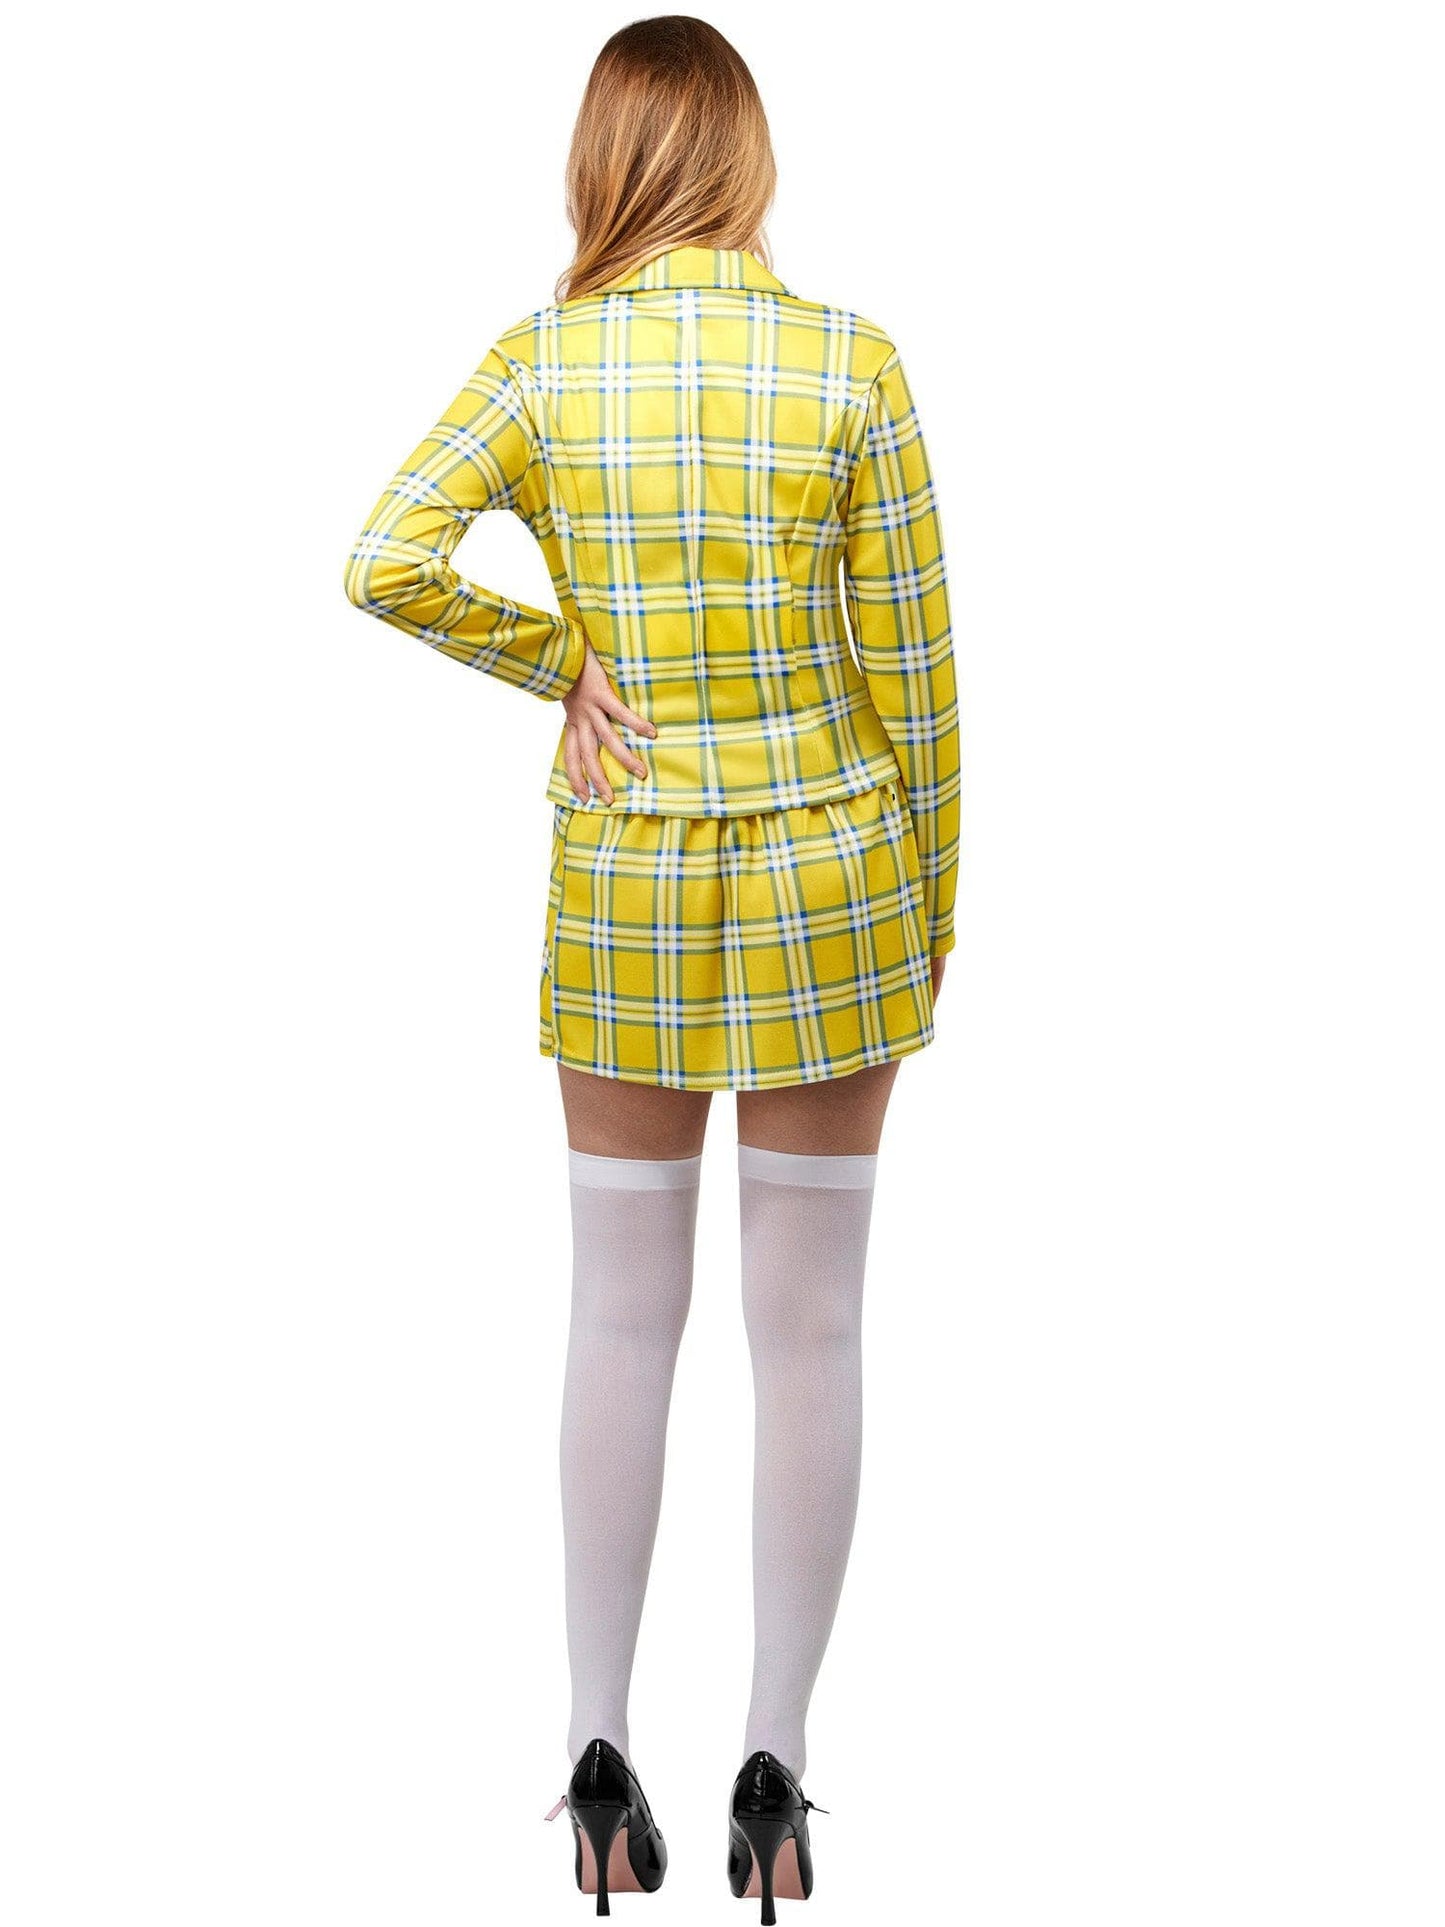 Clueless Cher Adult Costume